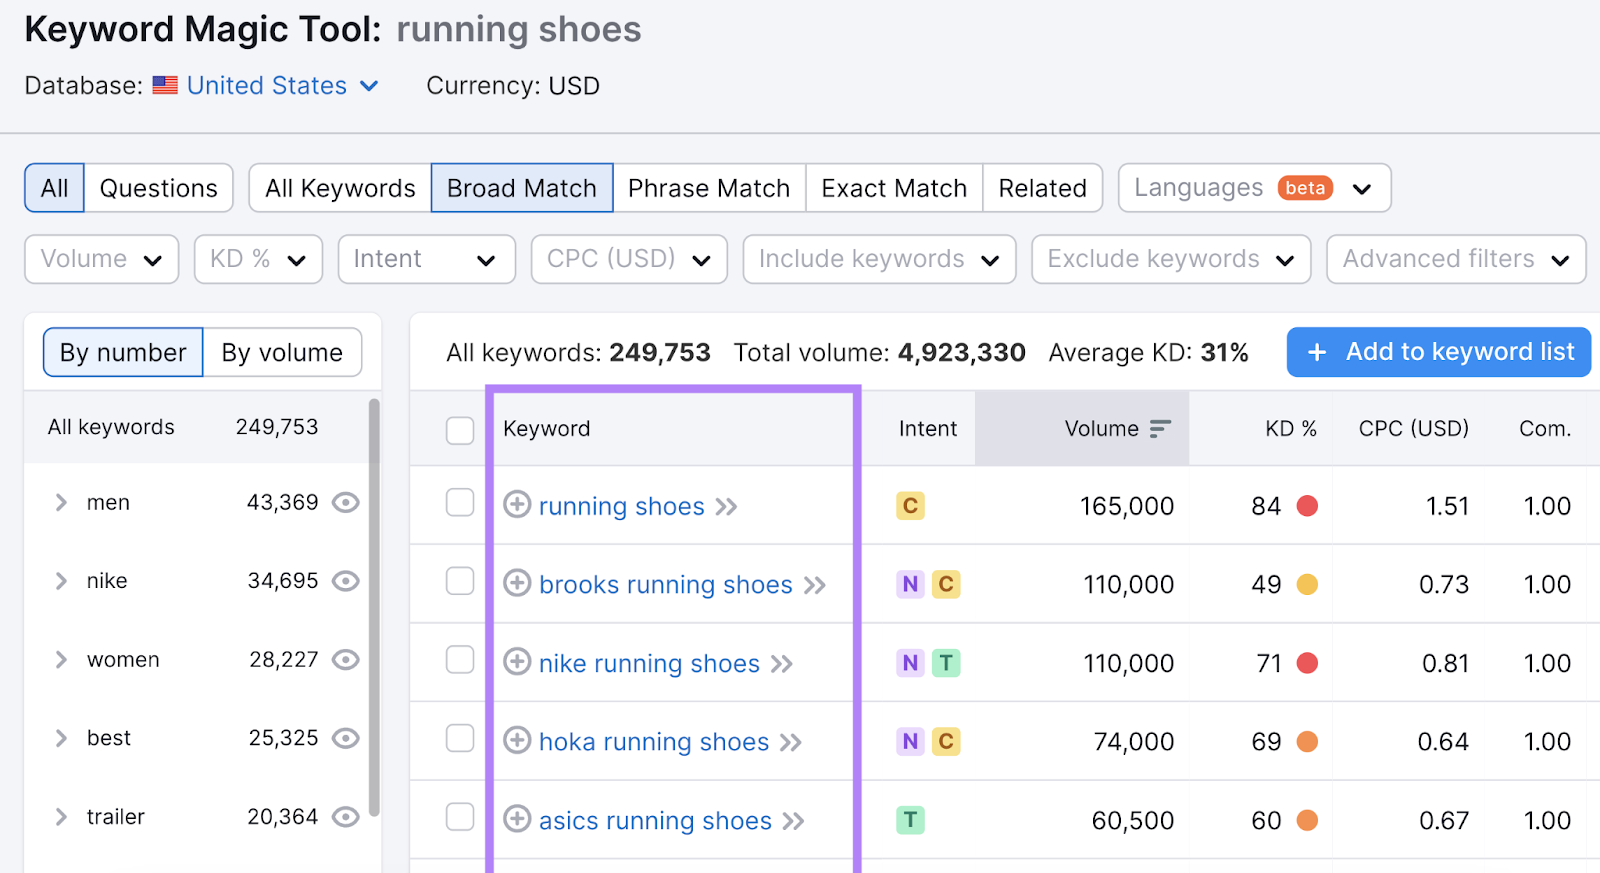 Related keywords array  for "running shoes" successful  Keyword Magic Tool